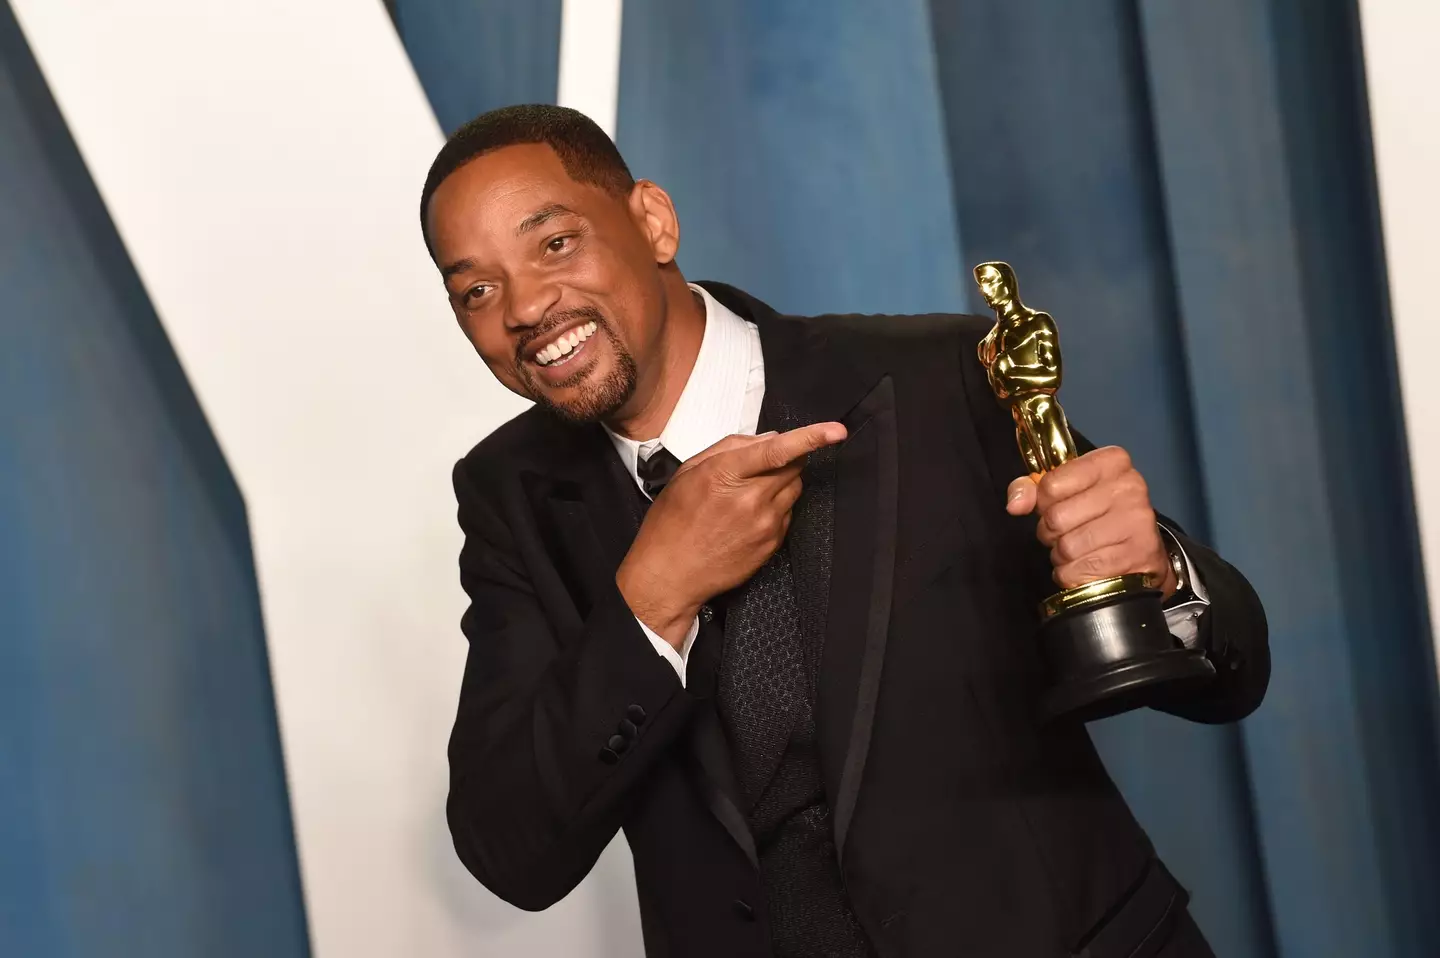 Will Smith got up on stage to hit comedian Chris Rock, prior to winning the award for Best Leading Actor later in the ceremony (